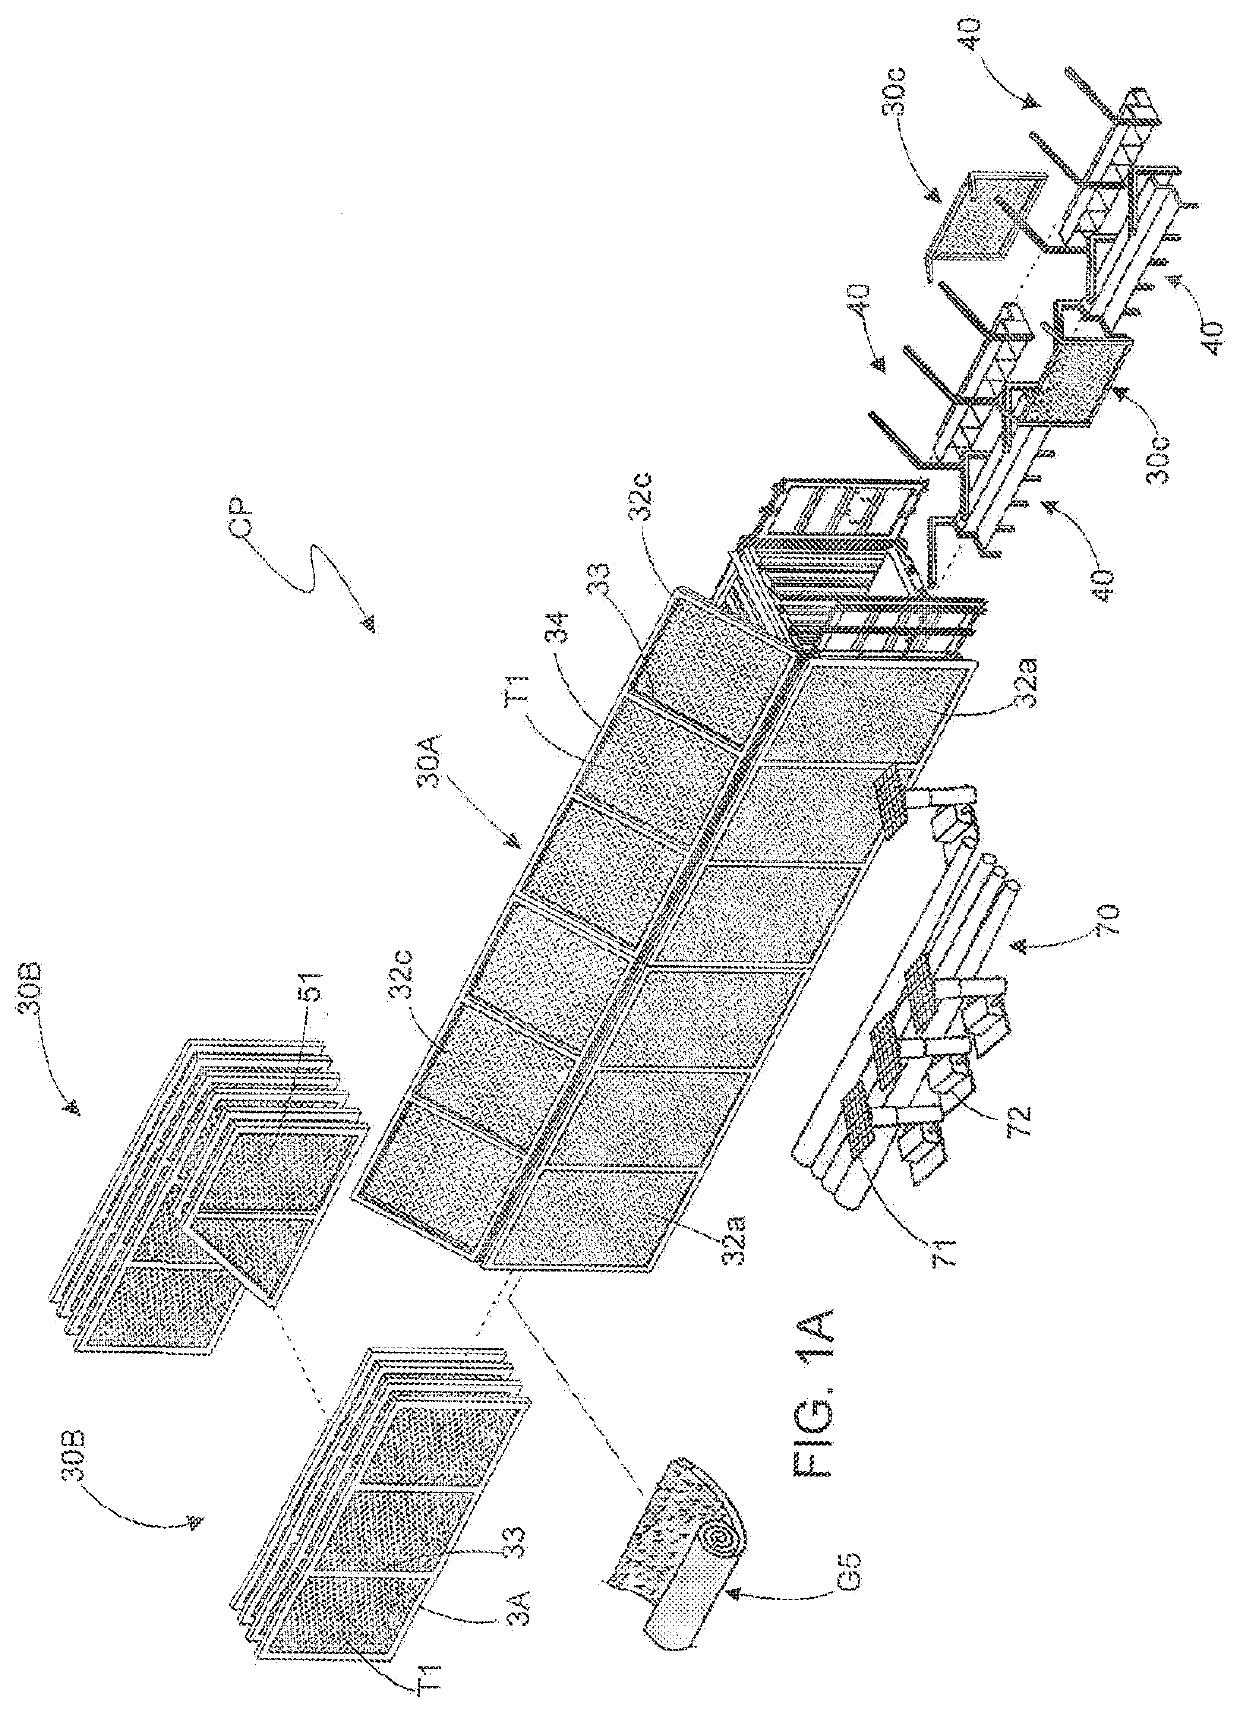 Portable, modular equipment for installation of a multi-sports and/or multi-use area and method of installing a multi-sports and/or multi-use area